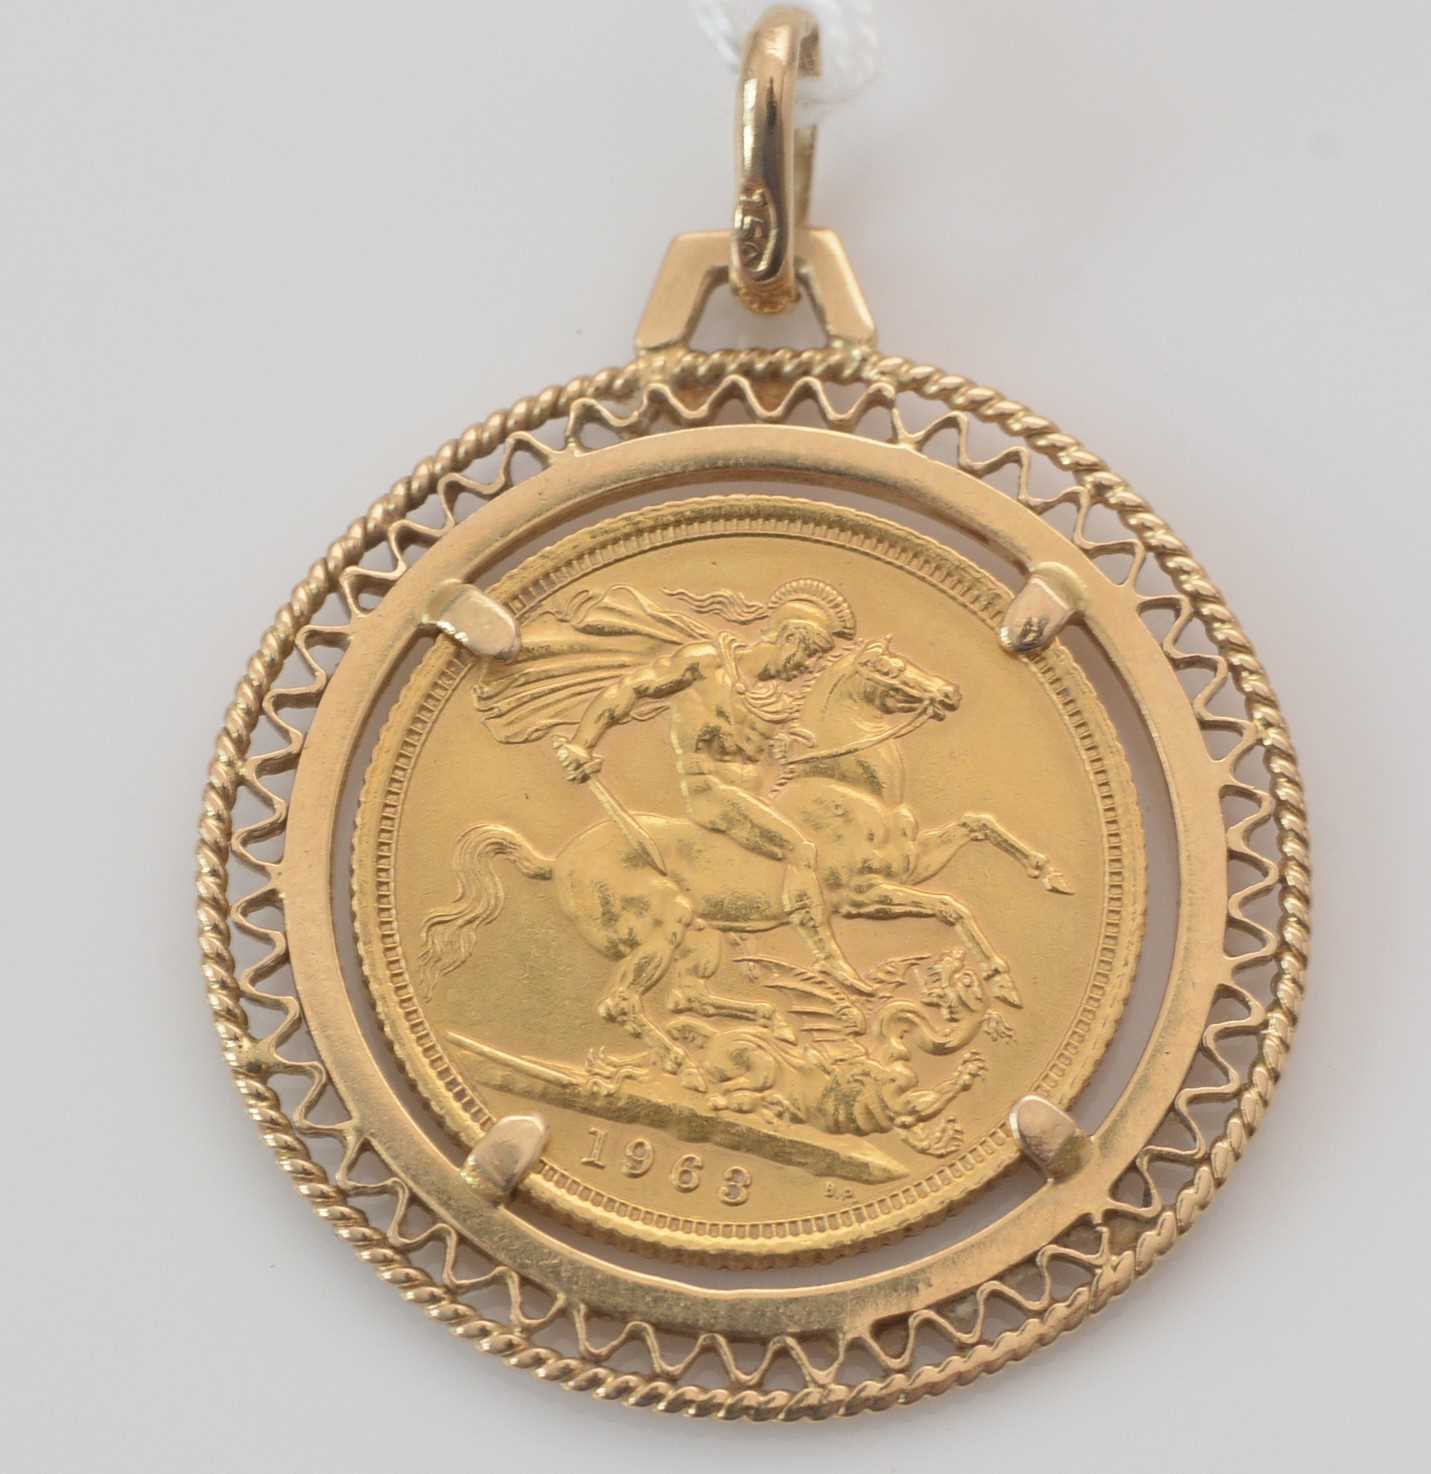 Lot 288 - Elizabeth II gold sovereign in 9ct. yellow gold pendant mount.